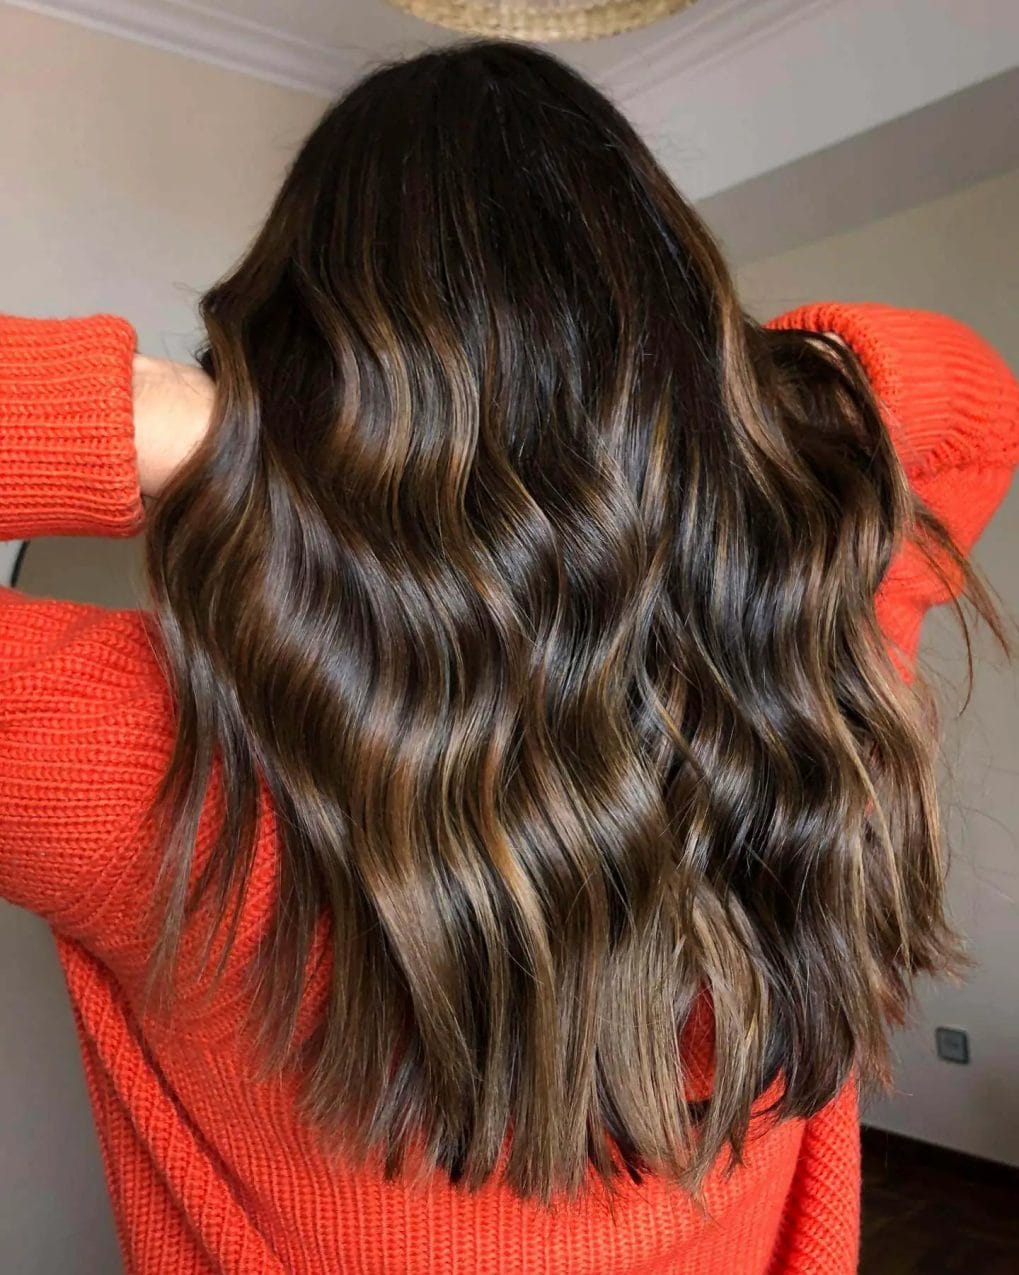 Cascading waves in espresso to hazelnut balayage, embodying the contrast of a winter evening.